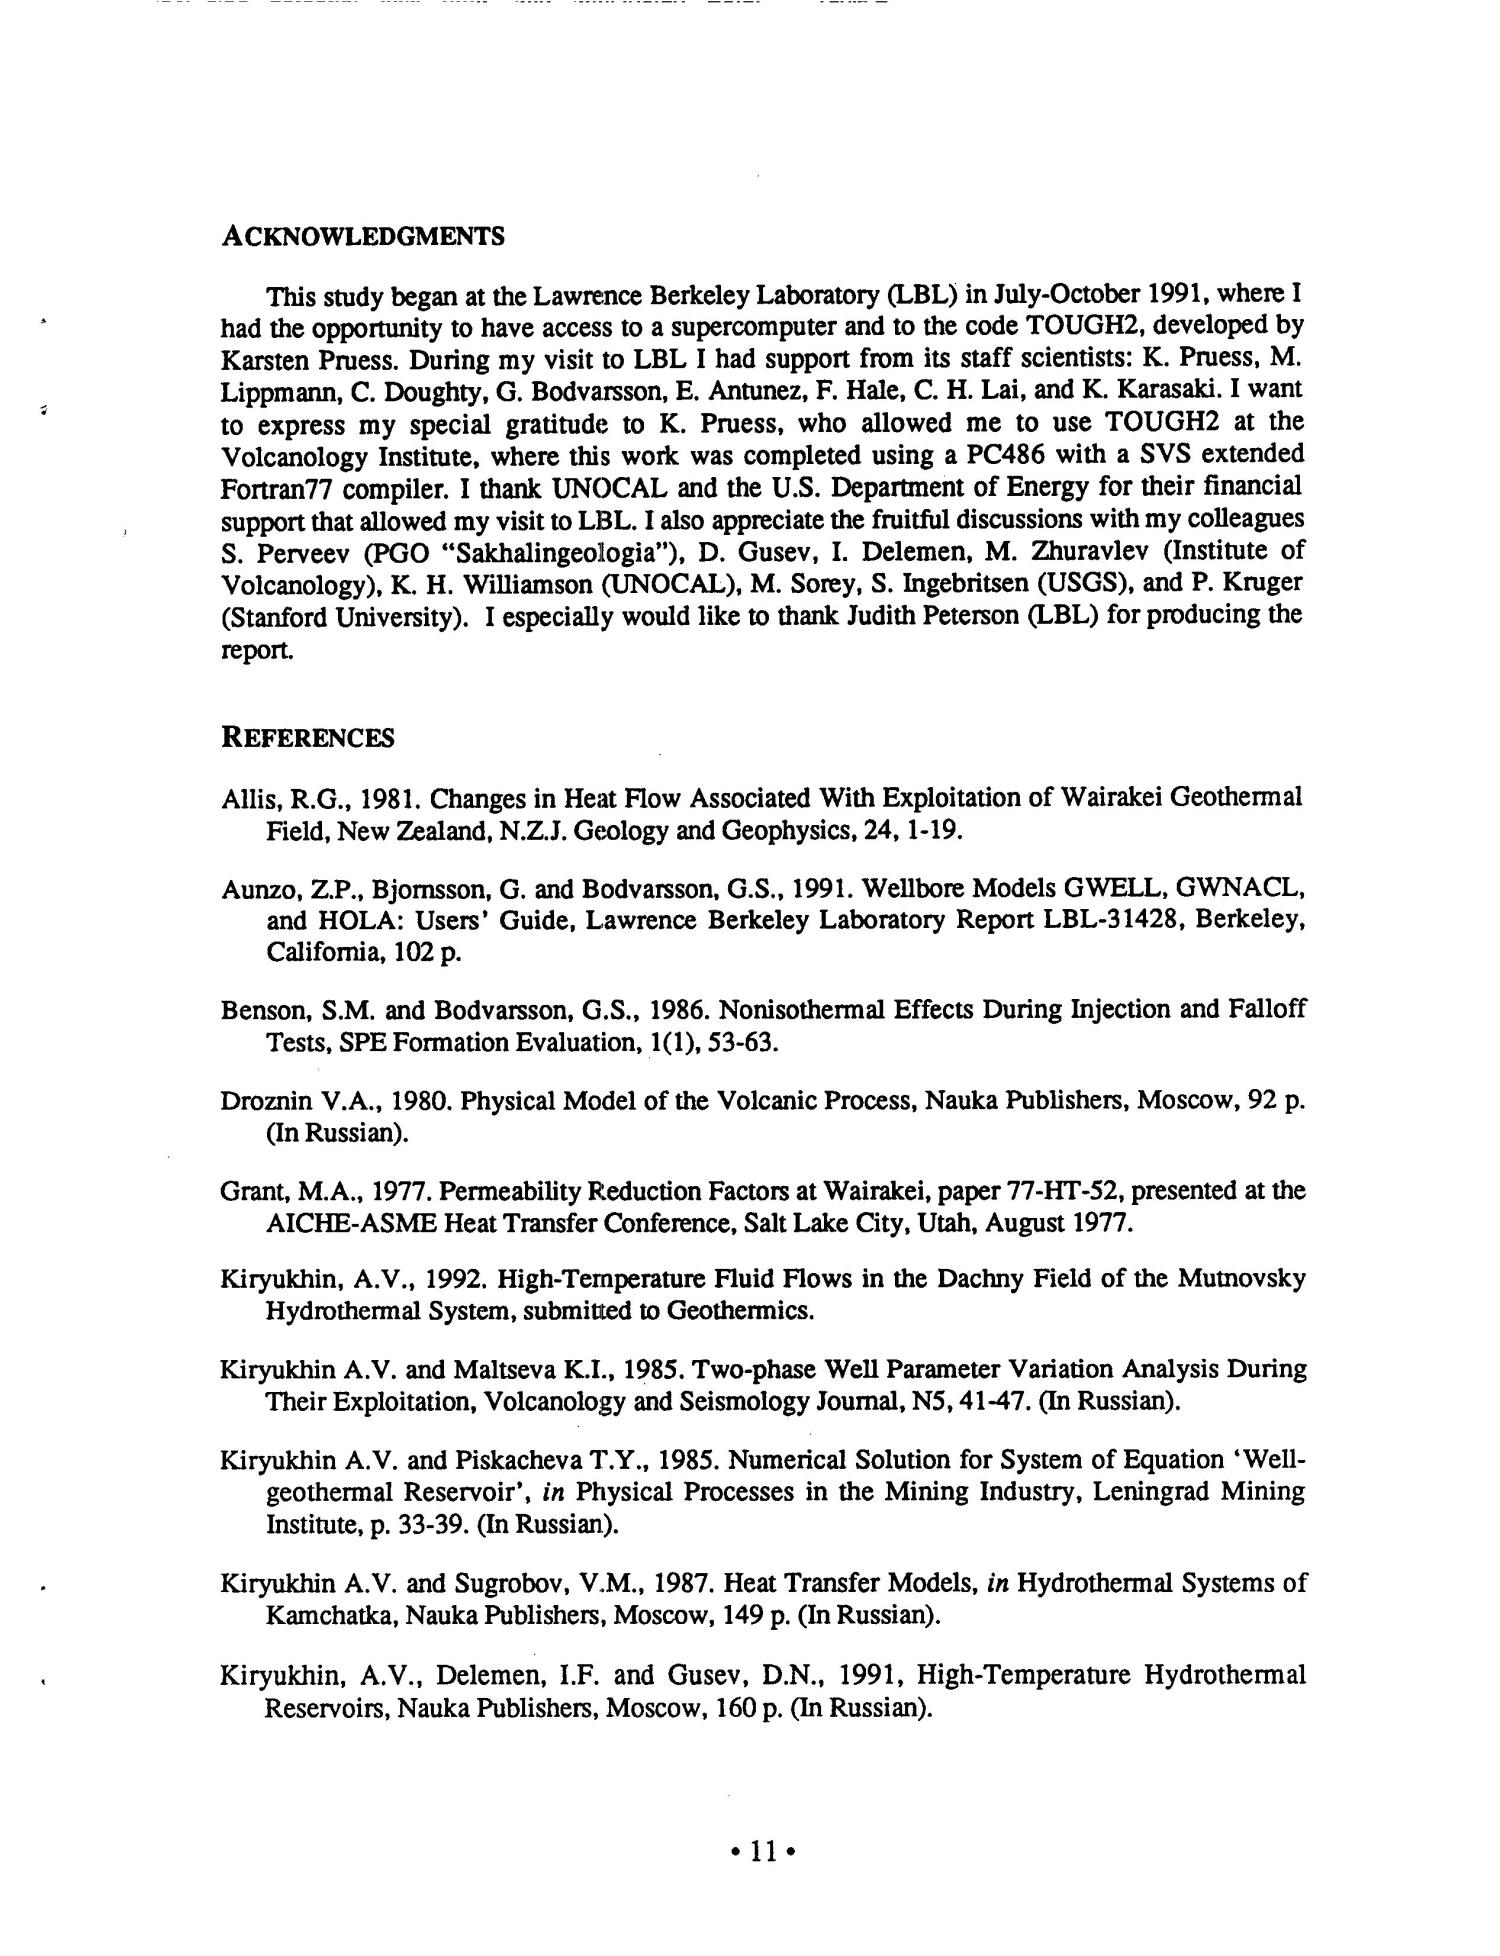 Progress report on modeling studies: Natural state conditions and exploitation of the Dachny geothermal reservoir, Mutnovsky hydrothermal system, Kamchatka, Russia
                                                
                                                    [Sequence #]: 14 of 24
                                                